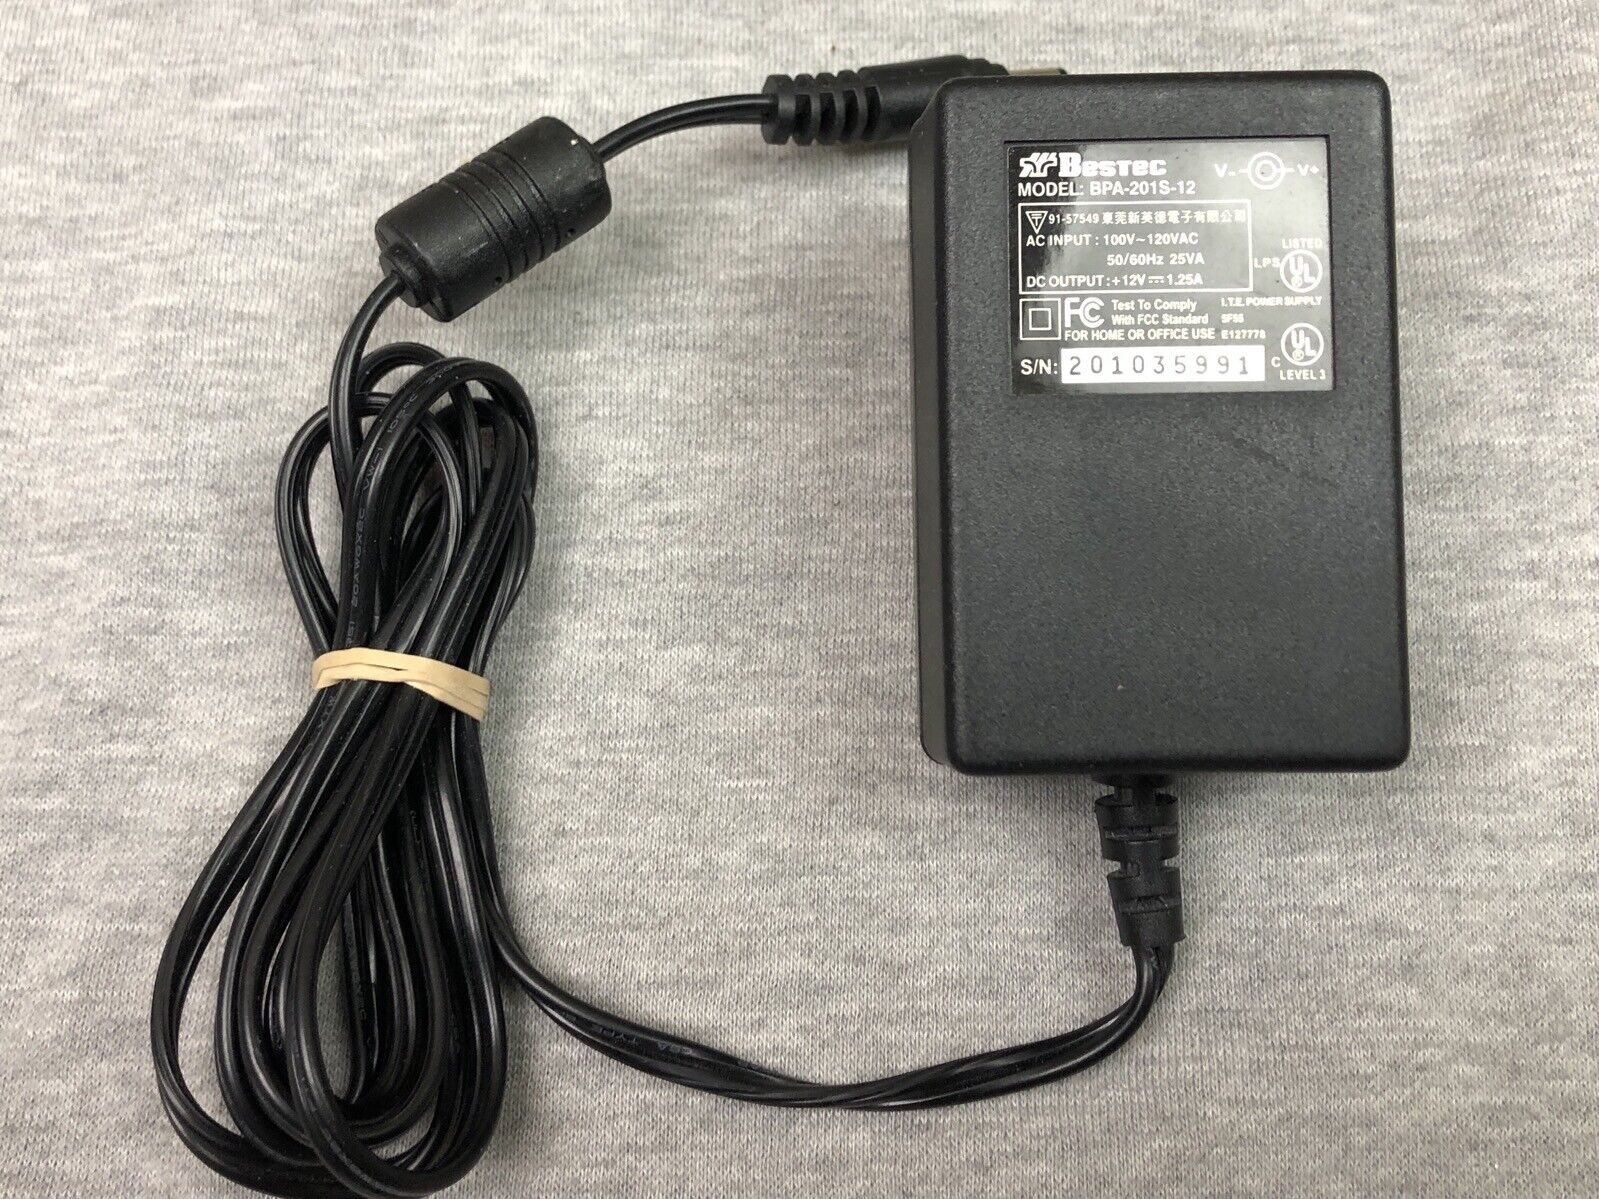 Bestec BPA-201S-12 AC Adapter Output DC 12V 1.25A Brand: Bestec Type: AC/DC Adapter UPC: Does not apply Output: D - Click Image to Close